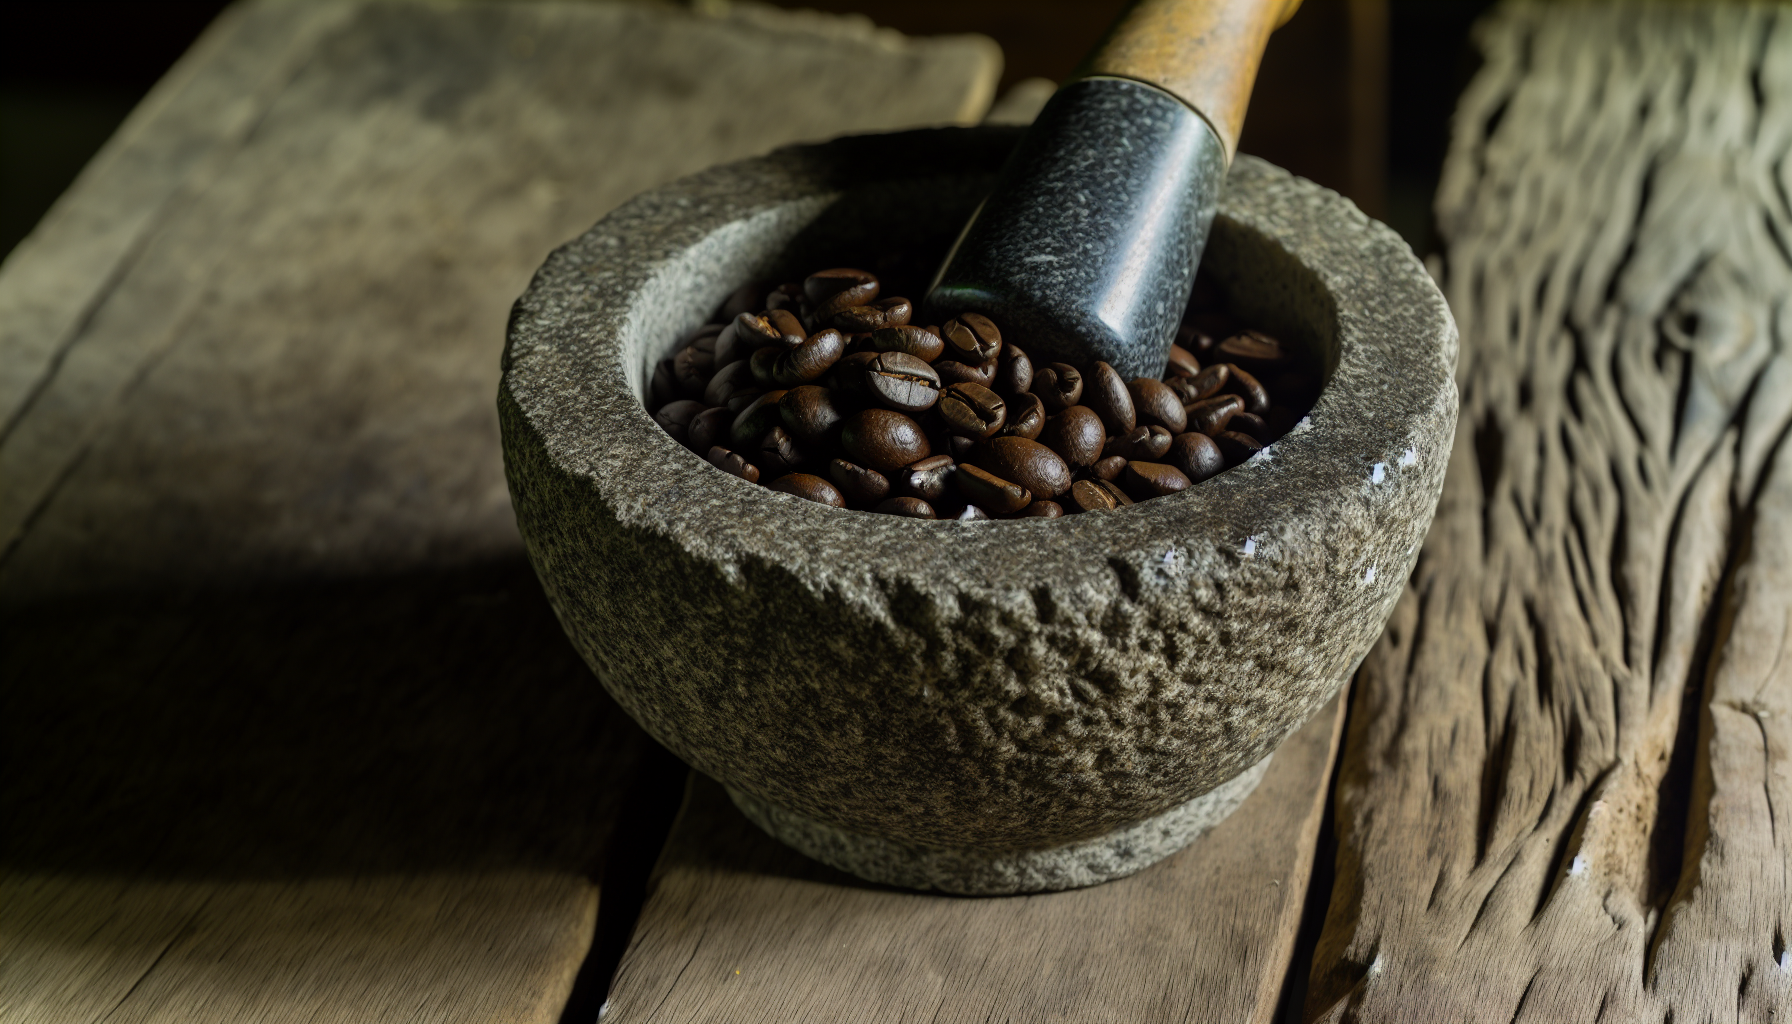 Mortar and pestle with whole bean coffee